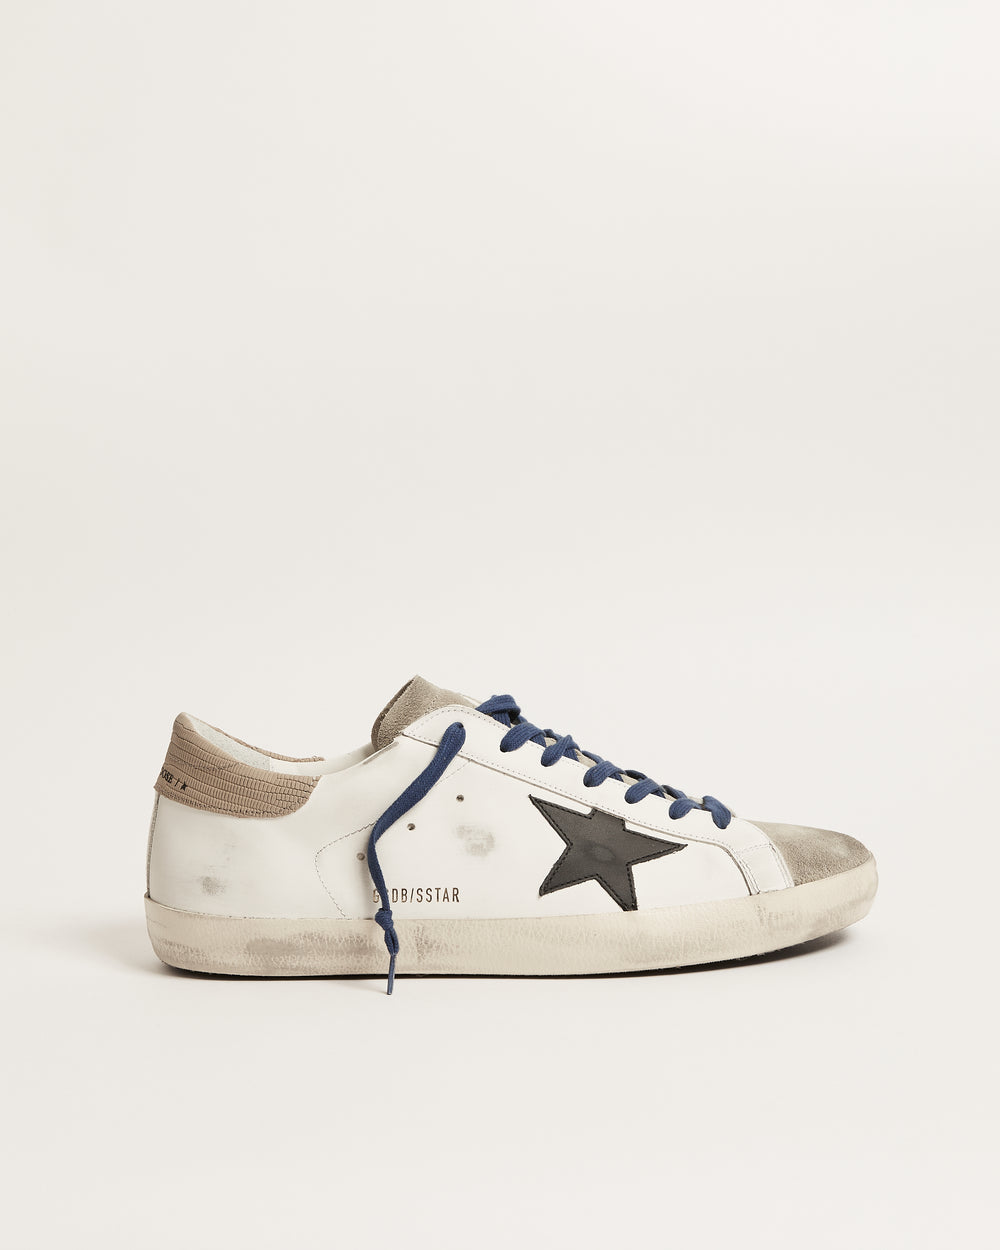 Super Star in White Leather w/ Suede Toe and Black Star